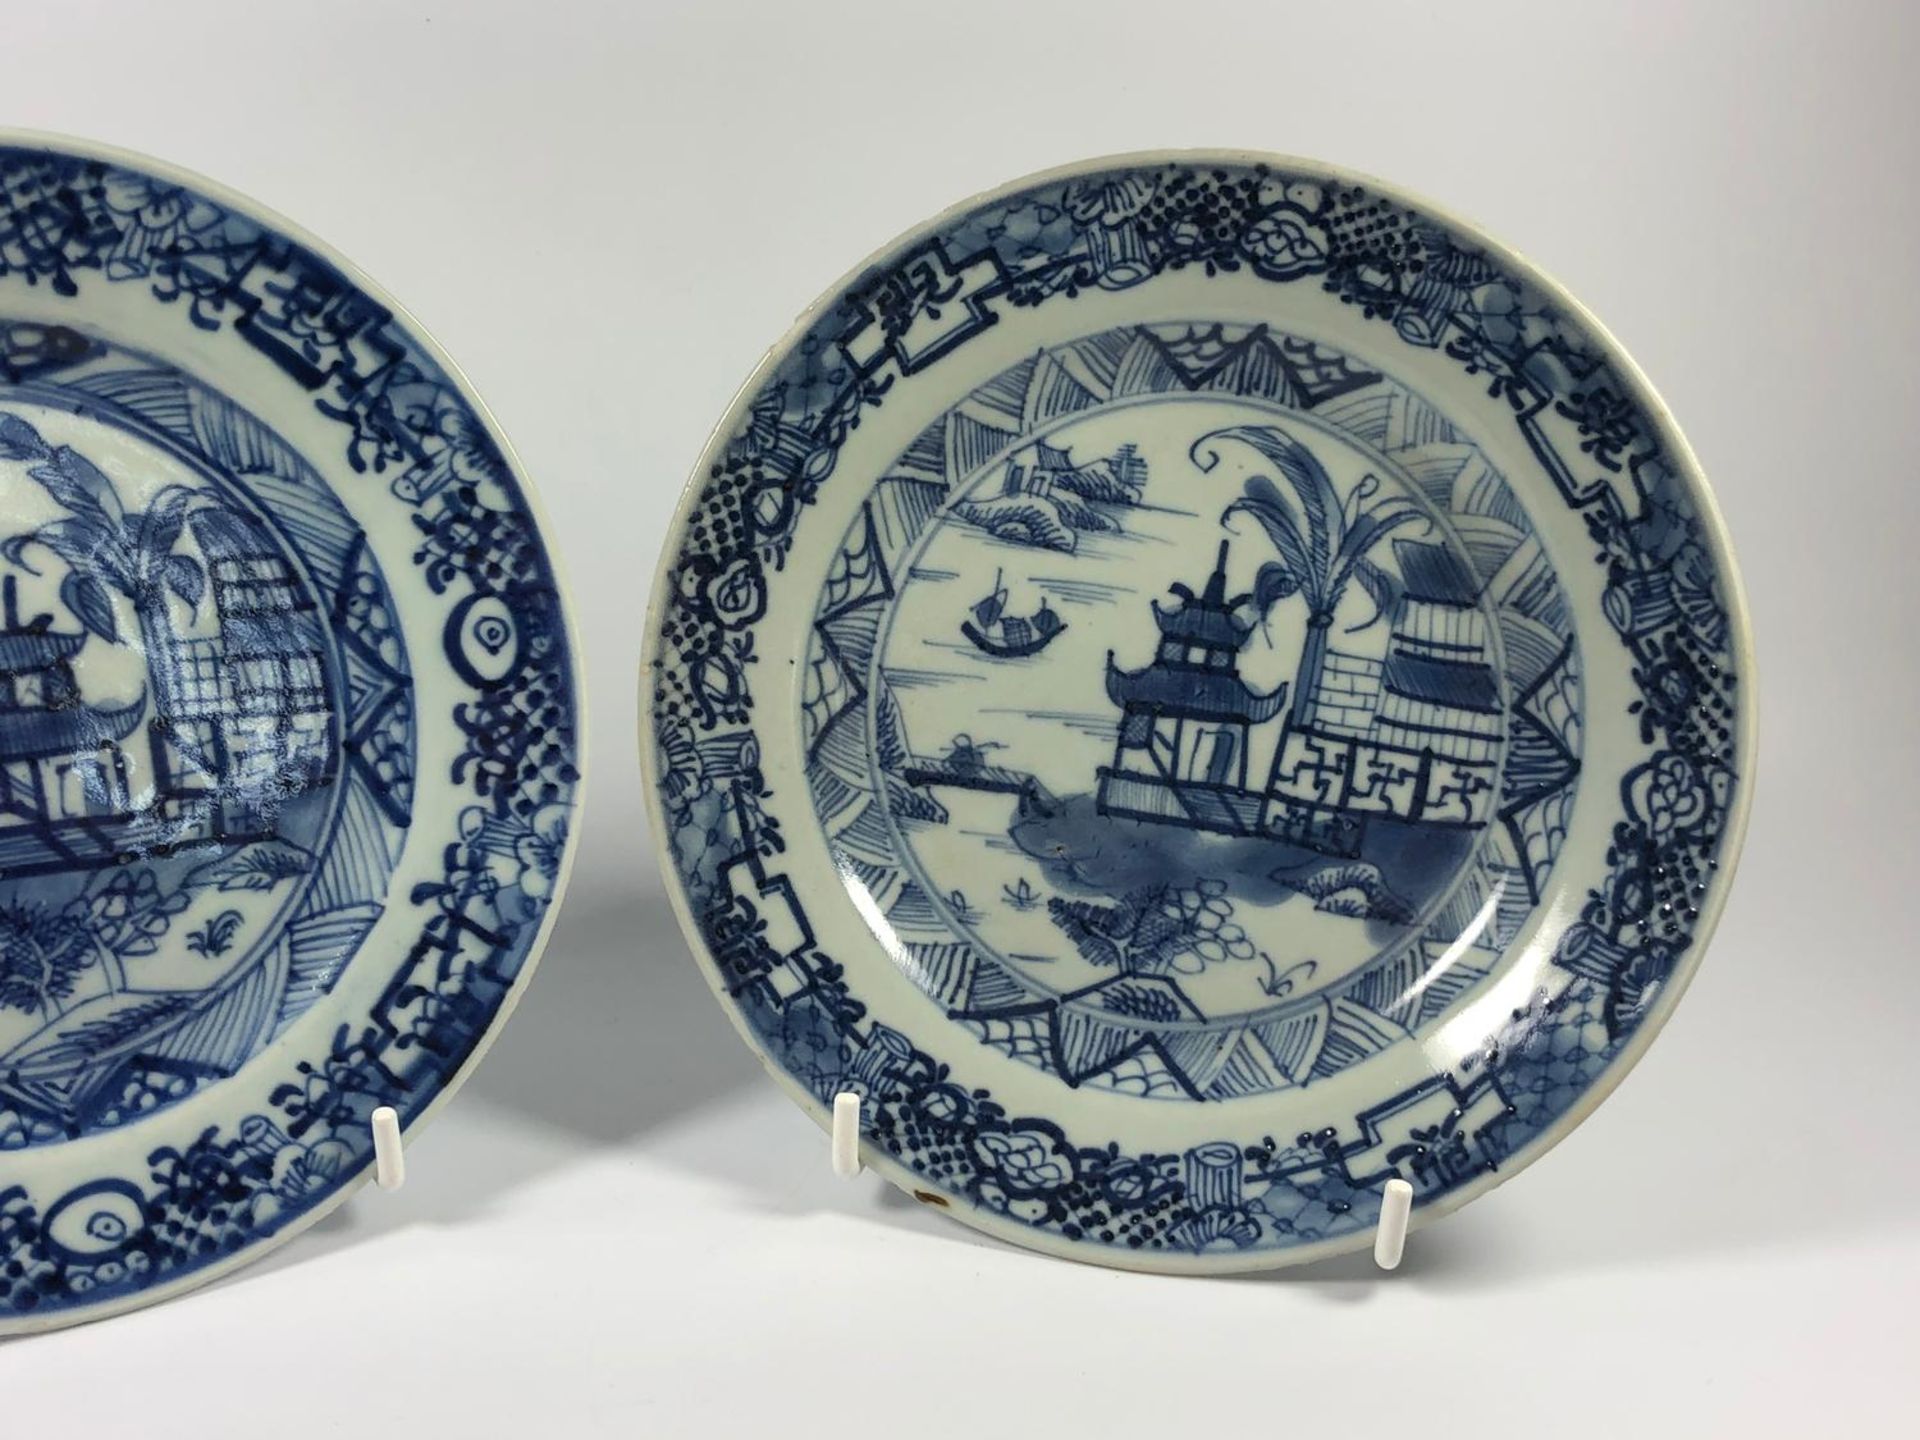 A PAIR OF 19TH CENTURY CHINESE BLUE AND WHITE DISHES / SIDE PLATES, DIAMETER 16.5CM - Image 4 of 9